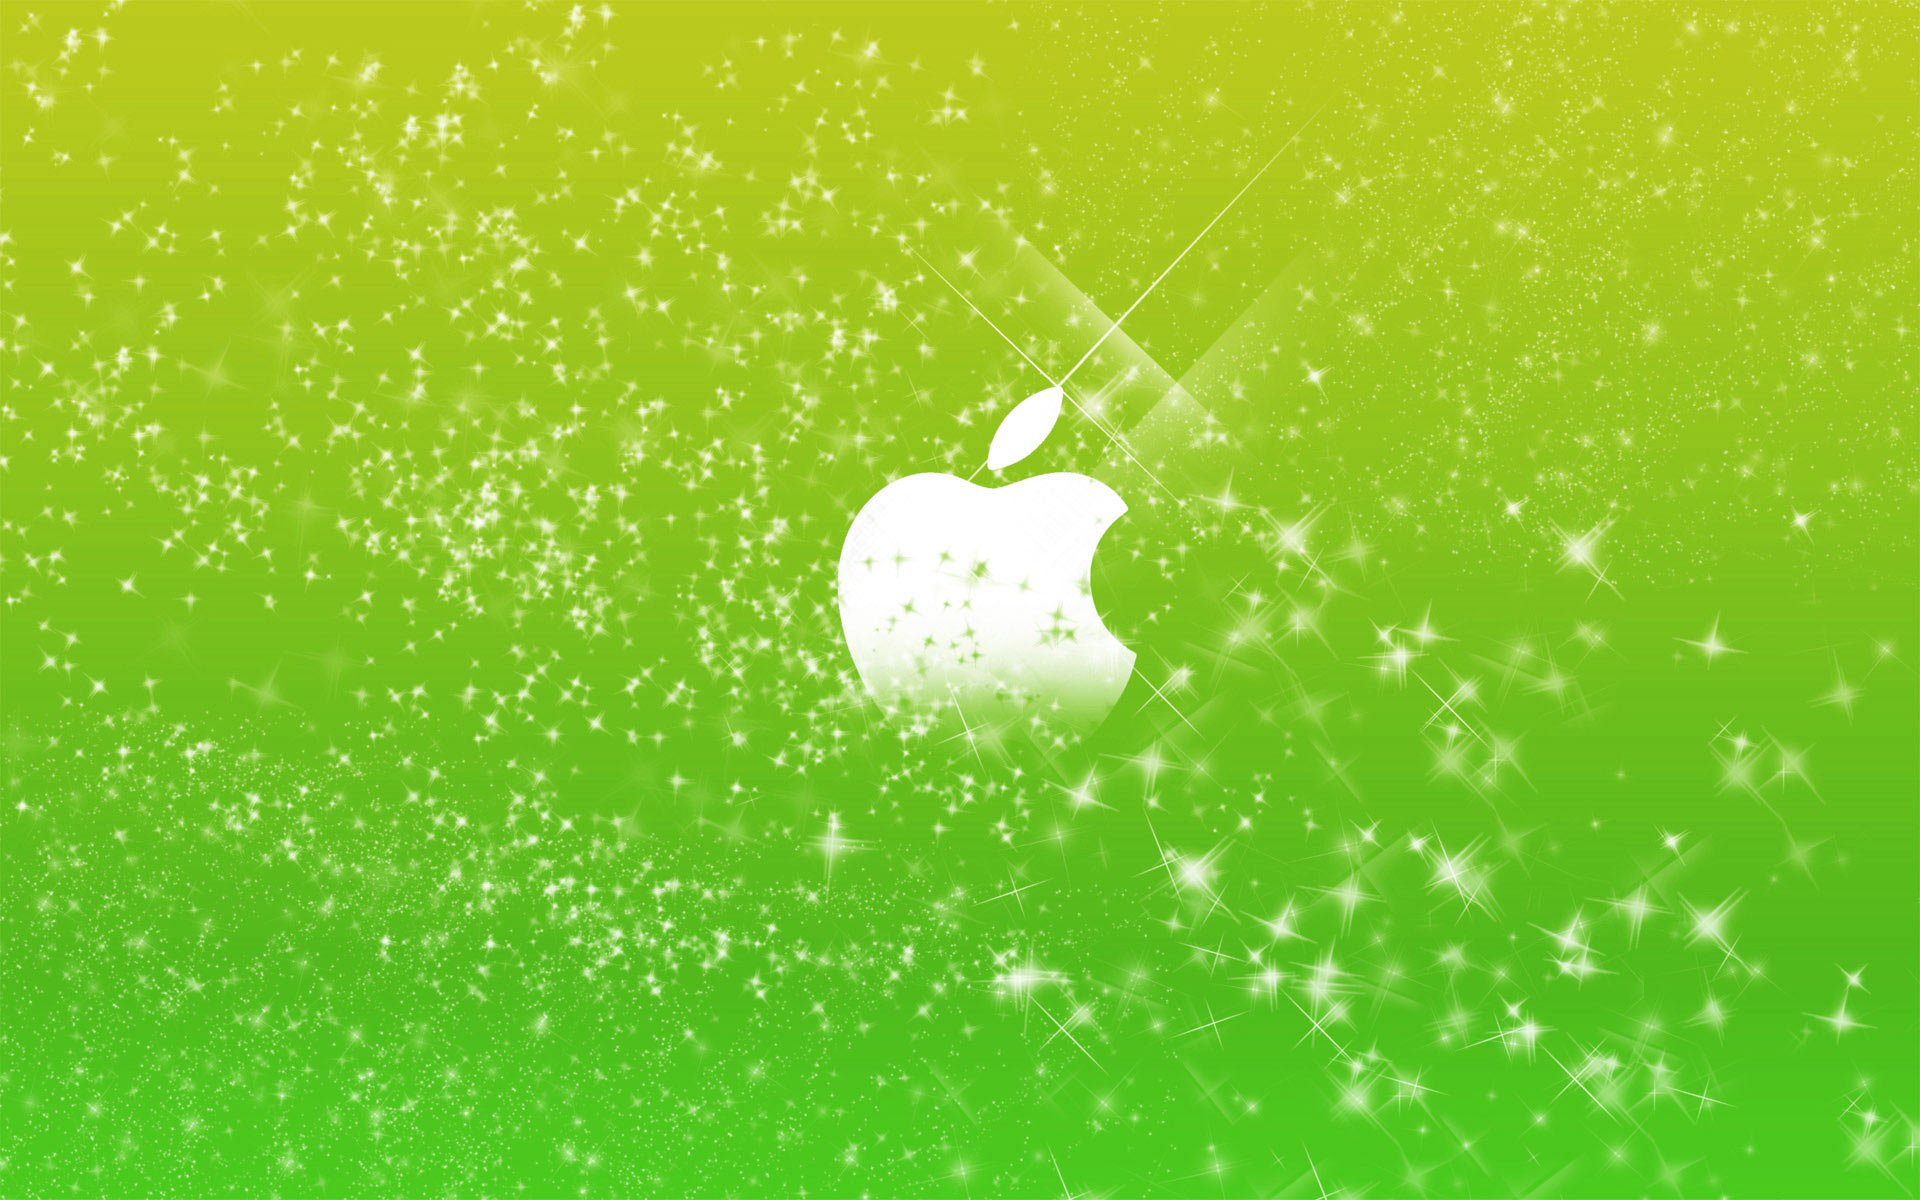 Green Background For Mac Wallpaper And Make This Your